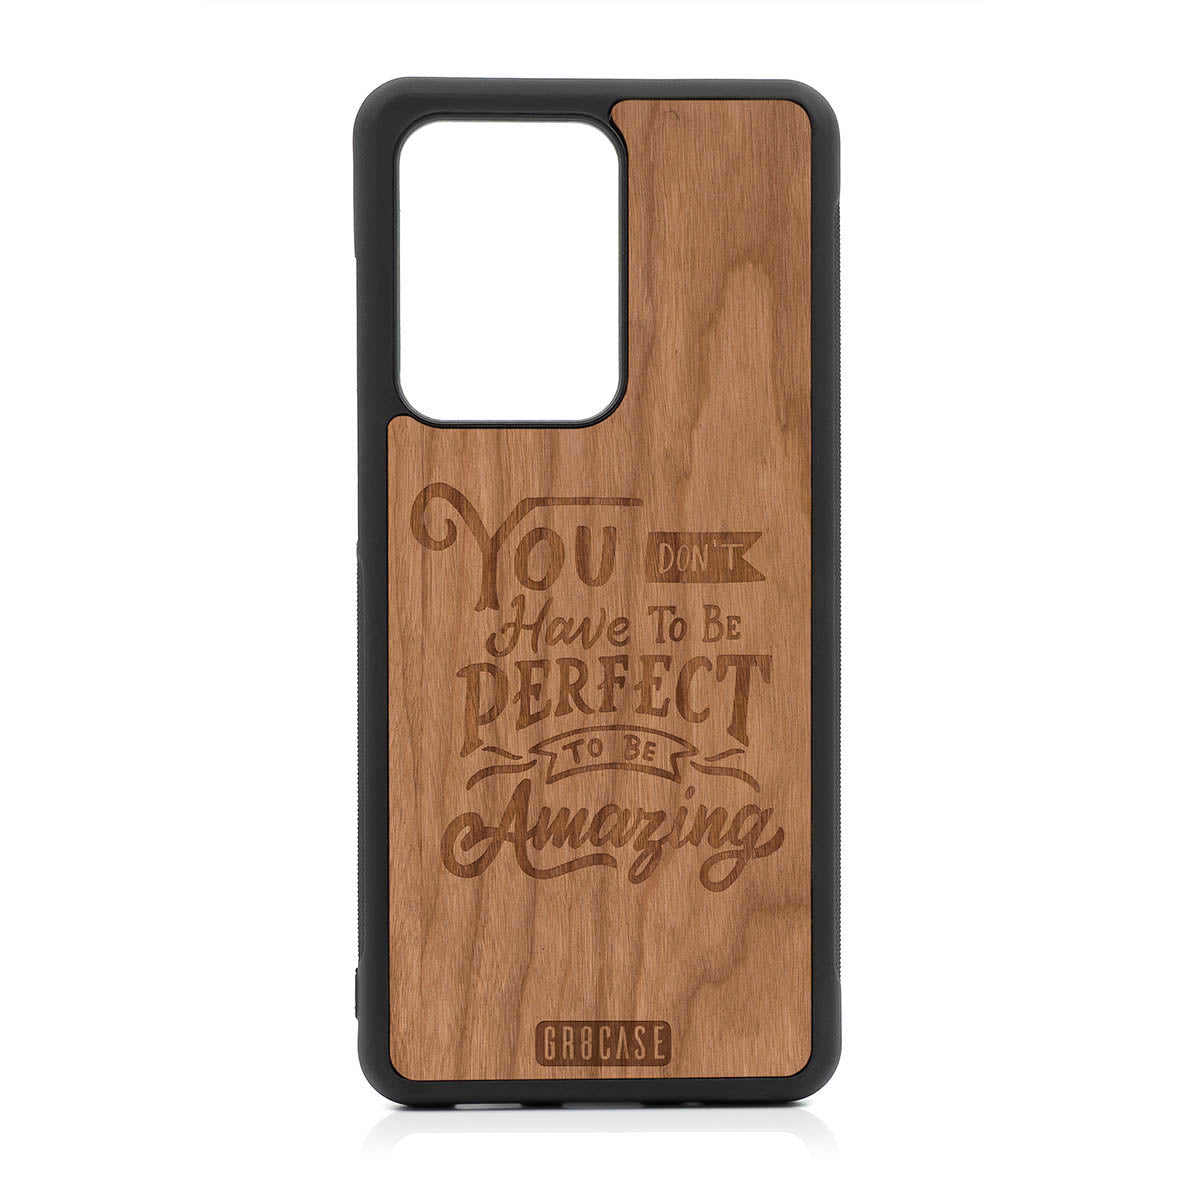 You Don't Have To Be Perfect To Be Amazing Design Wood Case For Samsung Galaxy S20 Ultra